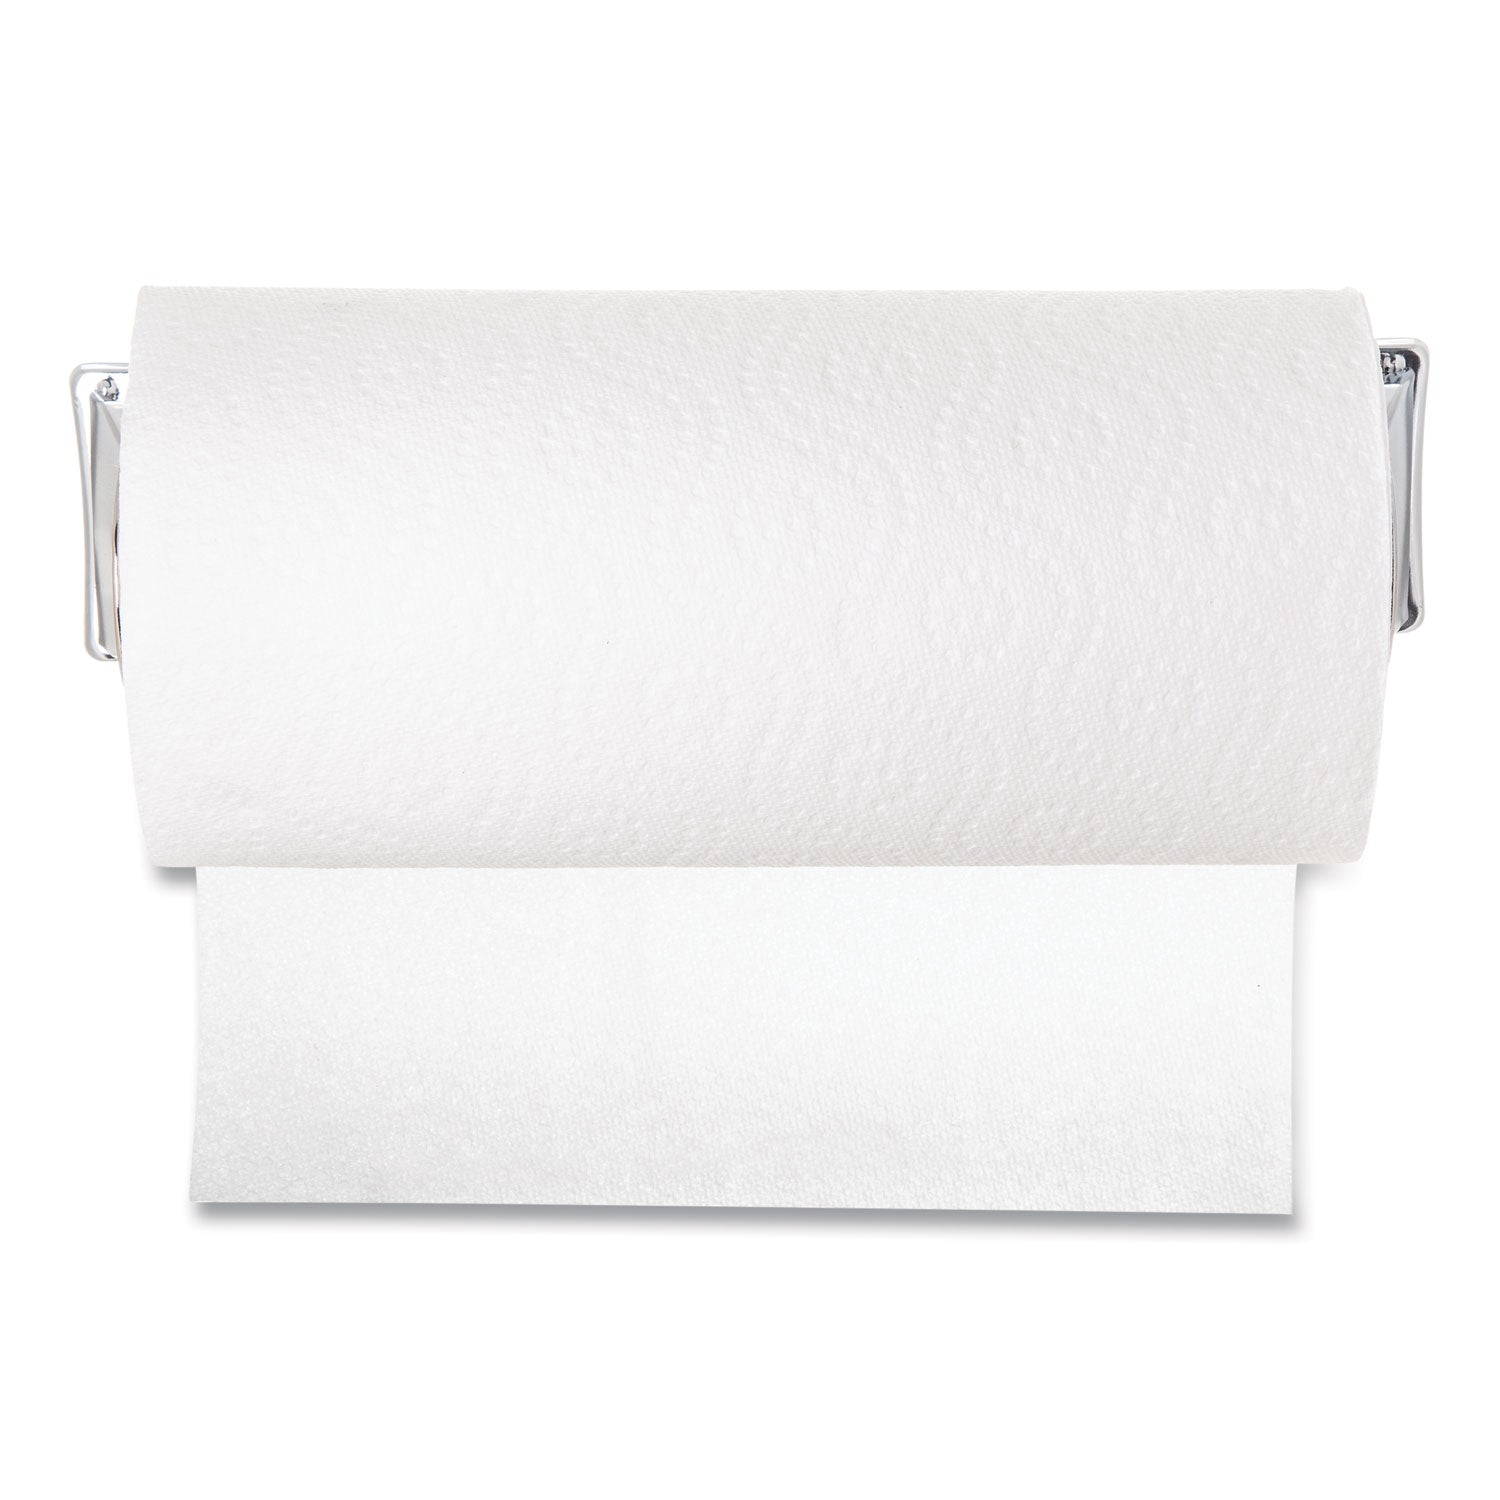 Perforated Roll Towel Dispenser for 11 inch Roll, 13.25 x 4.63 x 2.88, Chrome - 